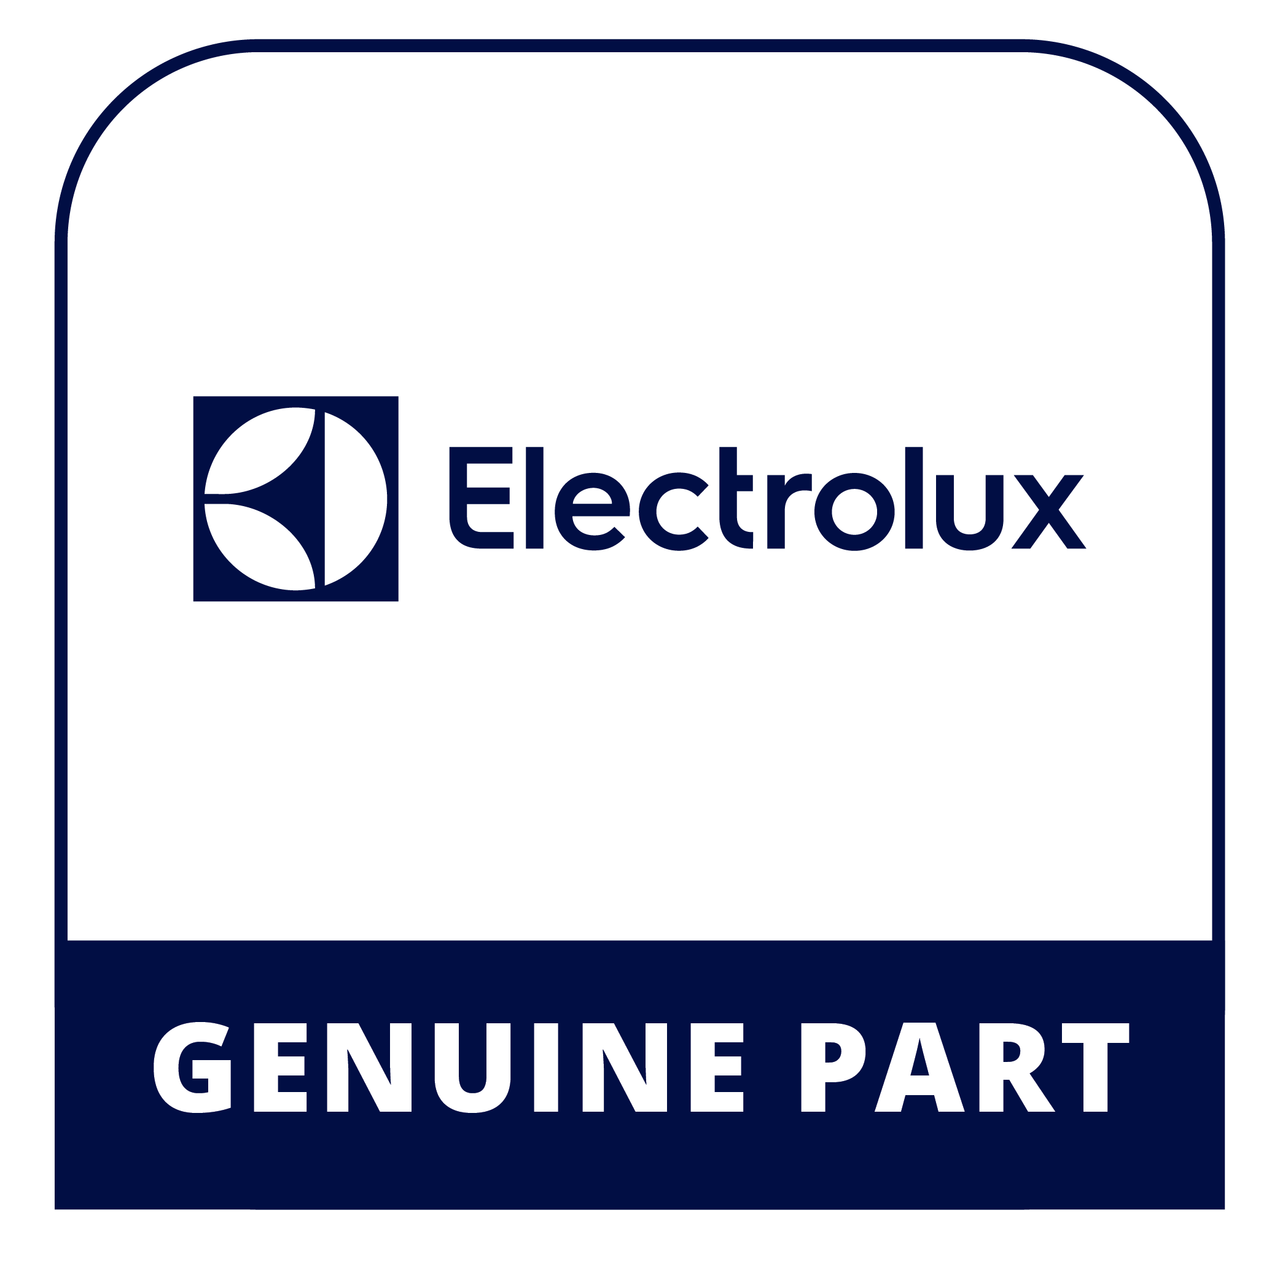 Frigidaire - Electrolux 316257930 Owners Manual - Genuine Electrolux Part